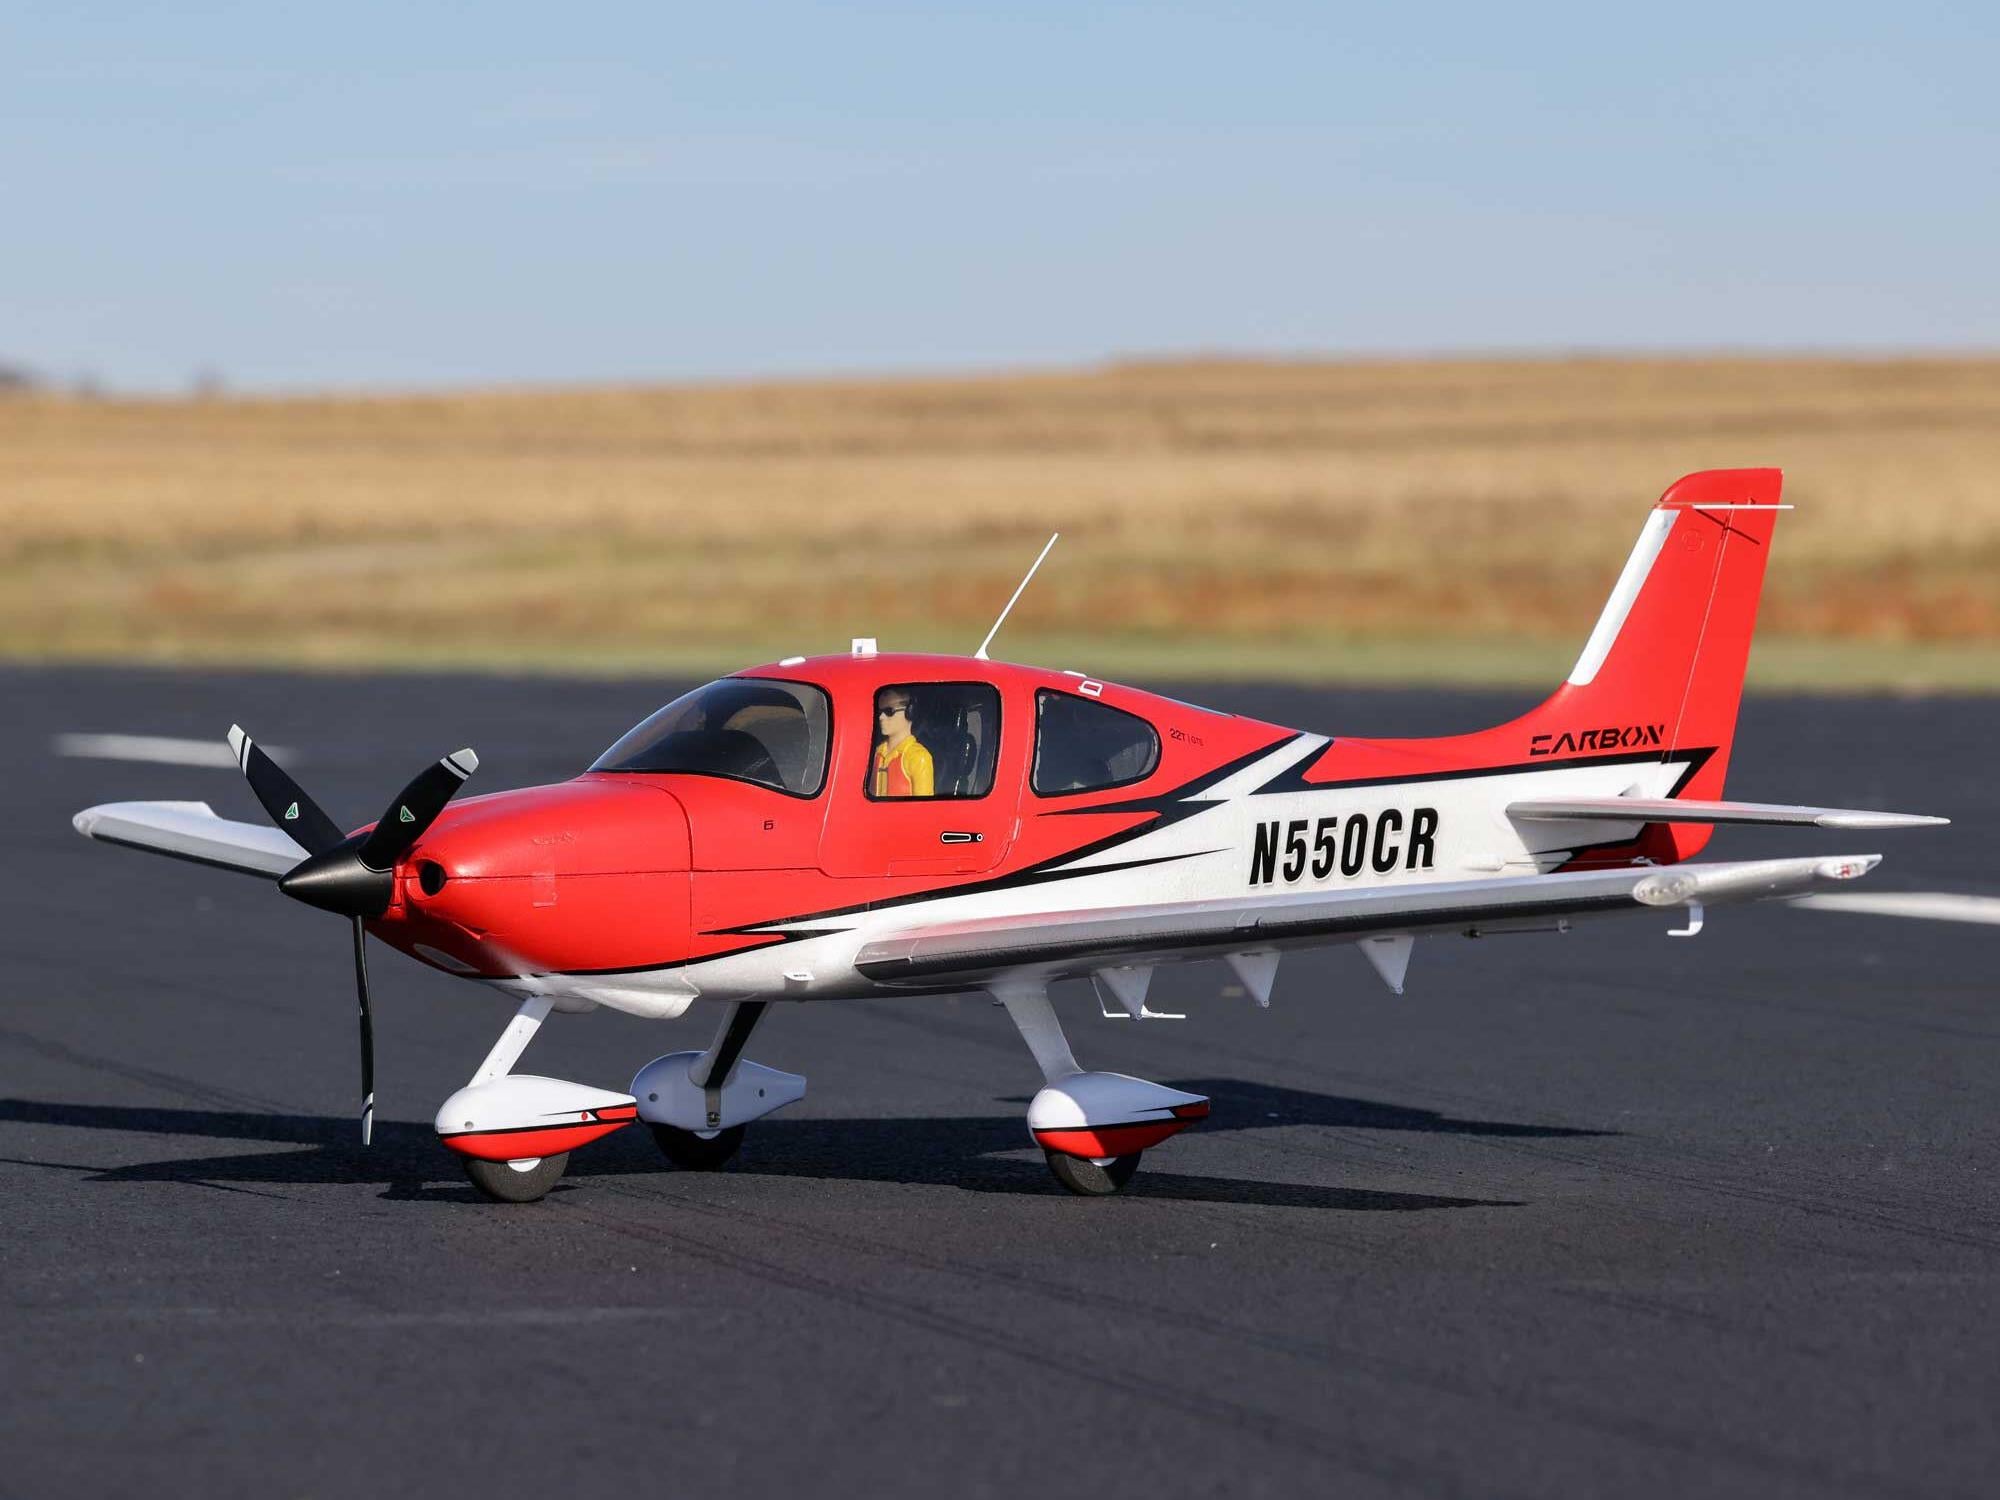 Cirrus SR22T 1.5m BNF Basic with Smart, AS3X and SAFE Select